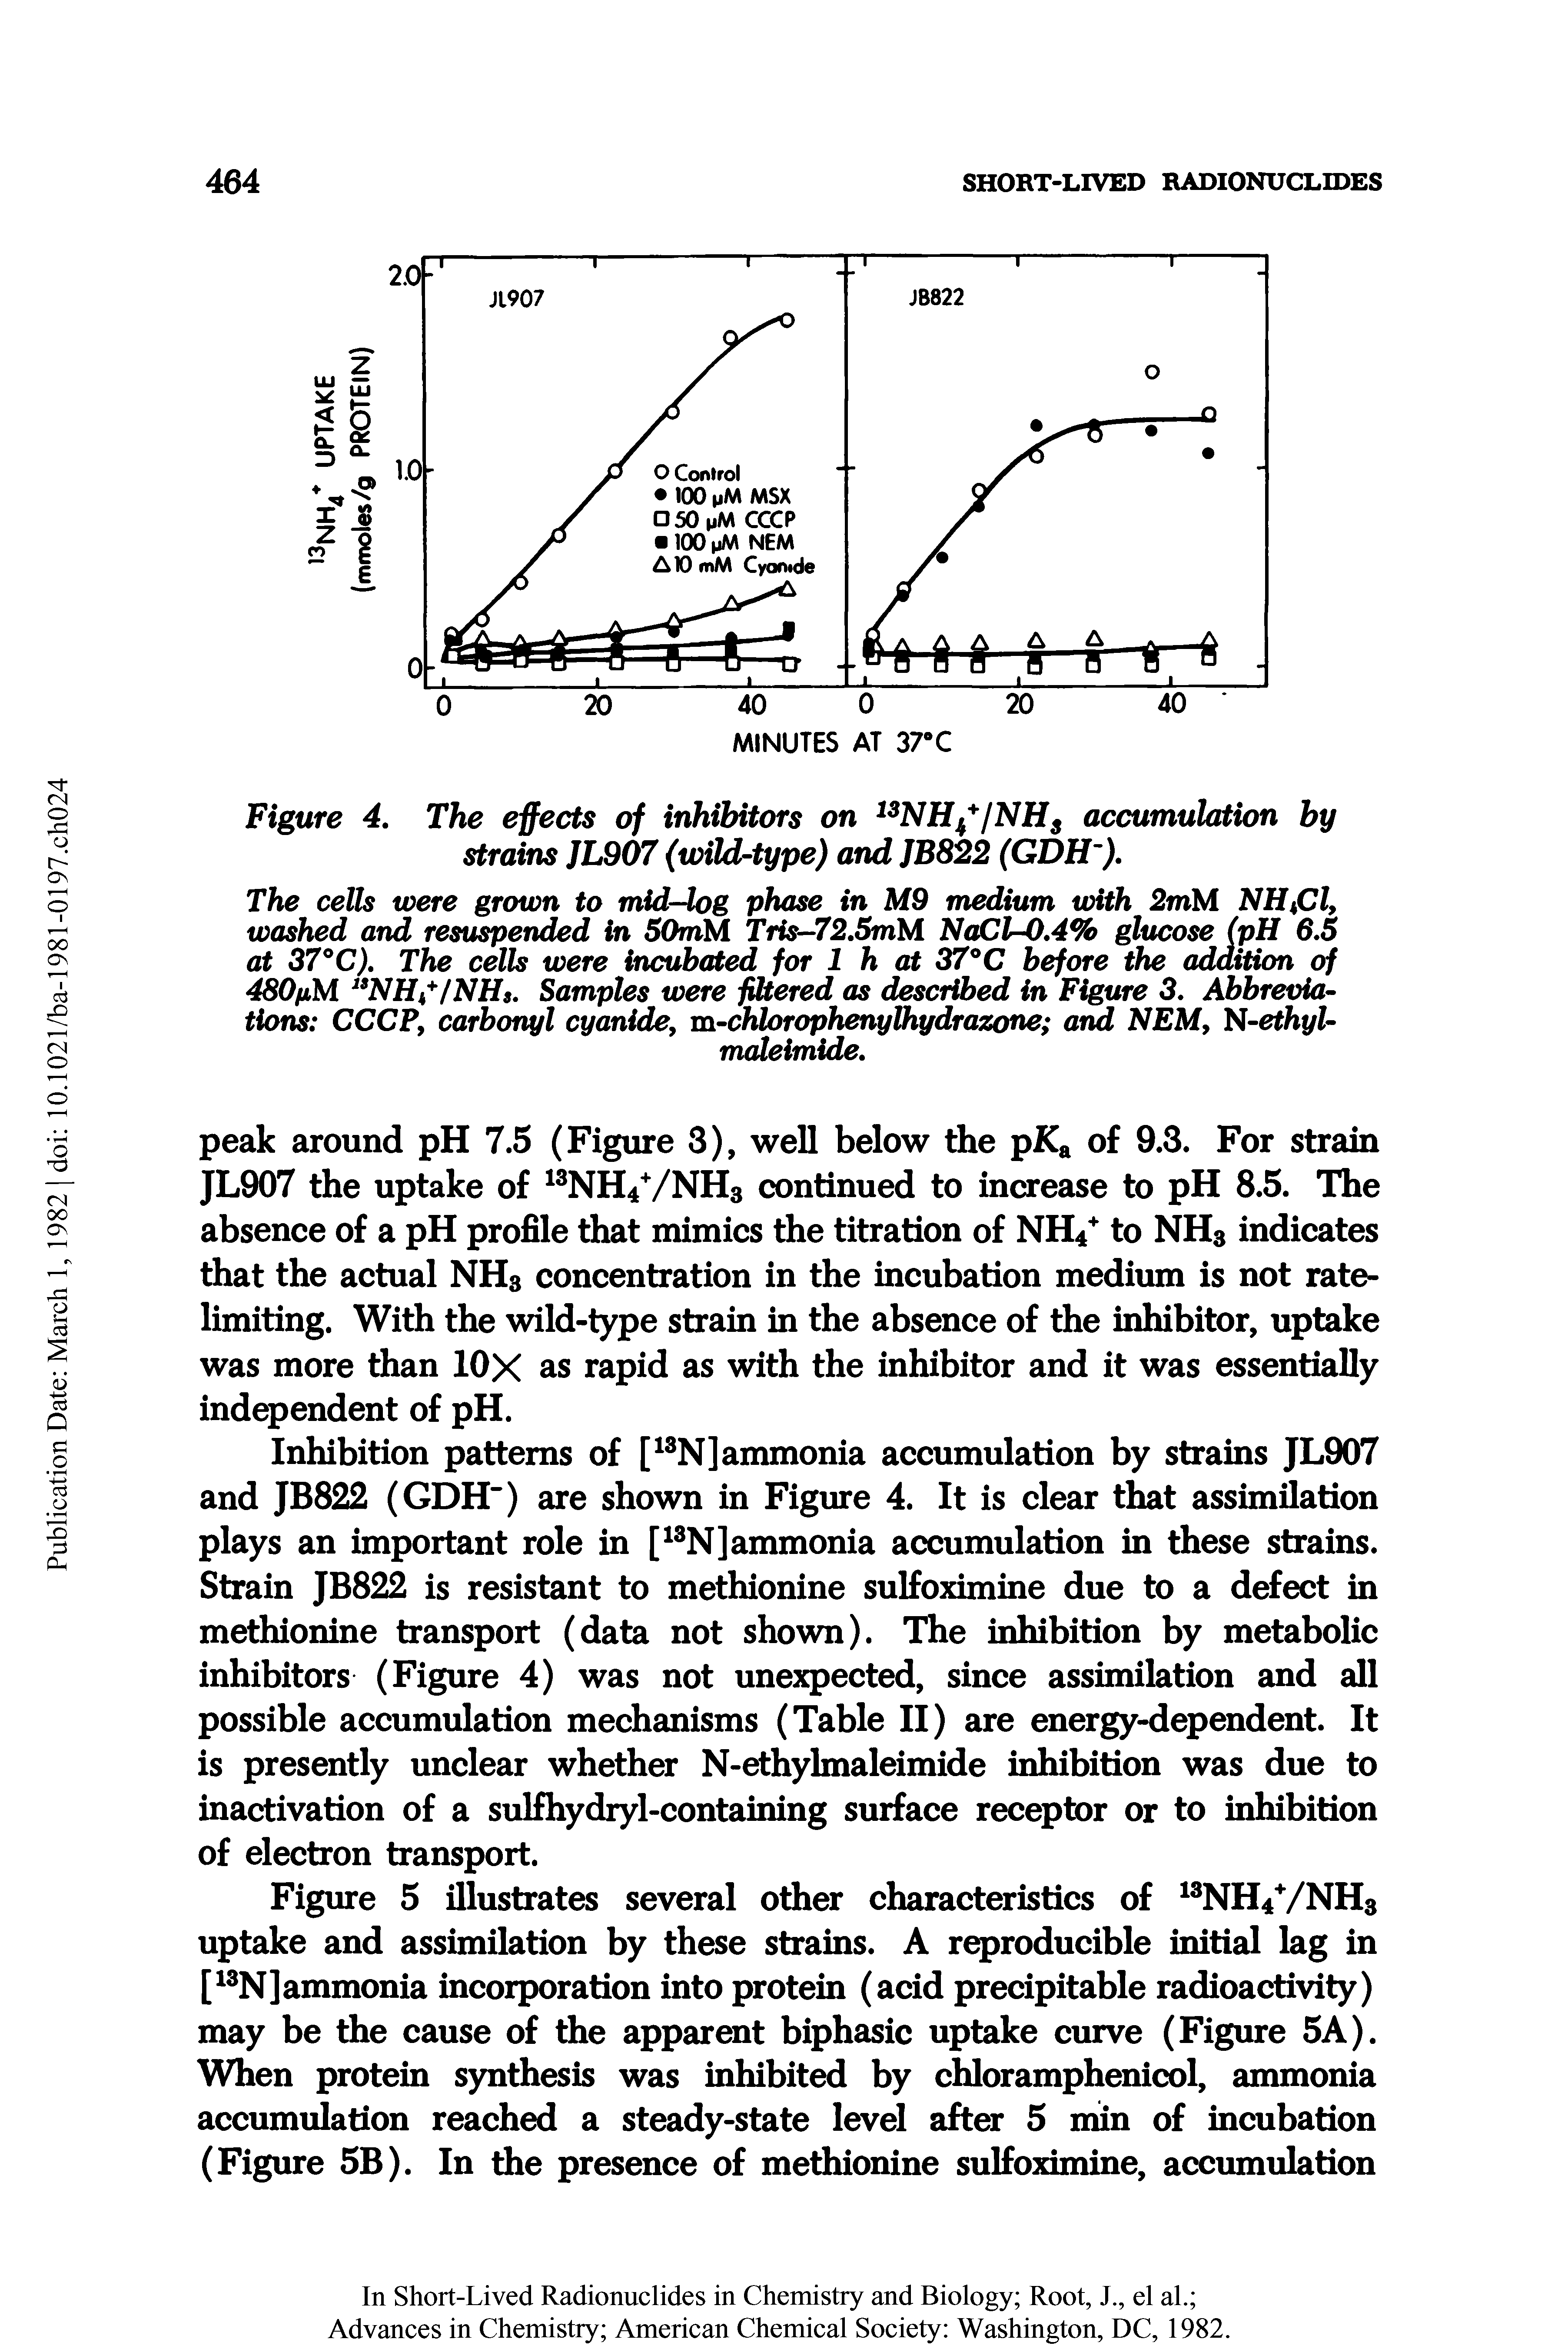 Figure 5 illustrates several other characteristics of NH4VNH3 uptake and assimilation by these strains. A reproducible initial lag in [ N]ammonia incorporation into protein (acid precipitable radioactivity) may be the cause of the apparent biphasic uptake curve (Figure 5A). When protein synthesis was inhibited by chloramphenicol, ammonia accumulation reached a steady-state level after 5 min of incubation (Figure 5B). In the presence of methionine sulfoximine, accumulation...